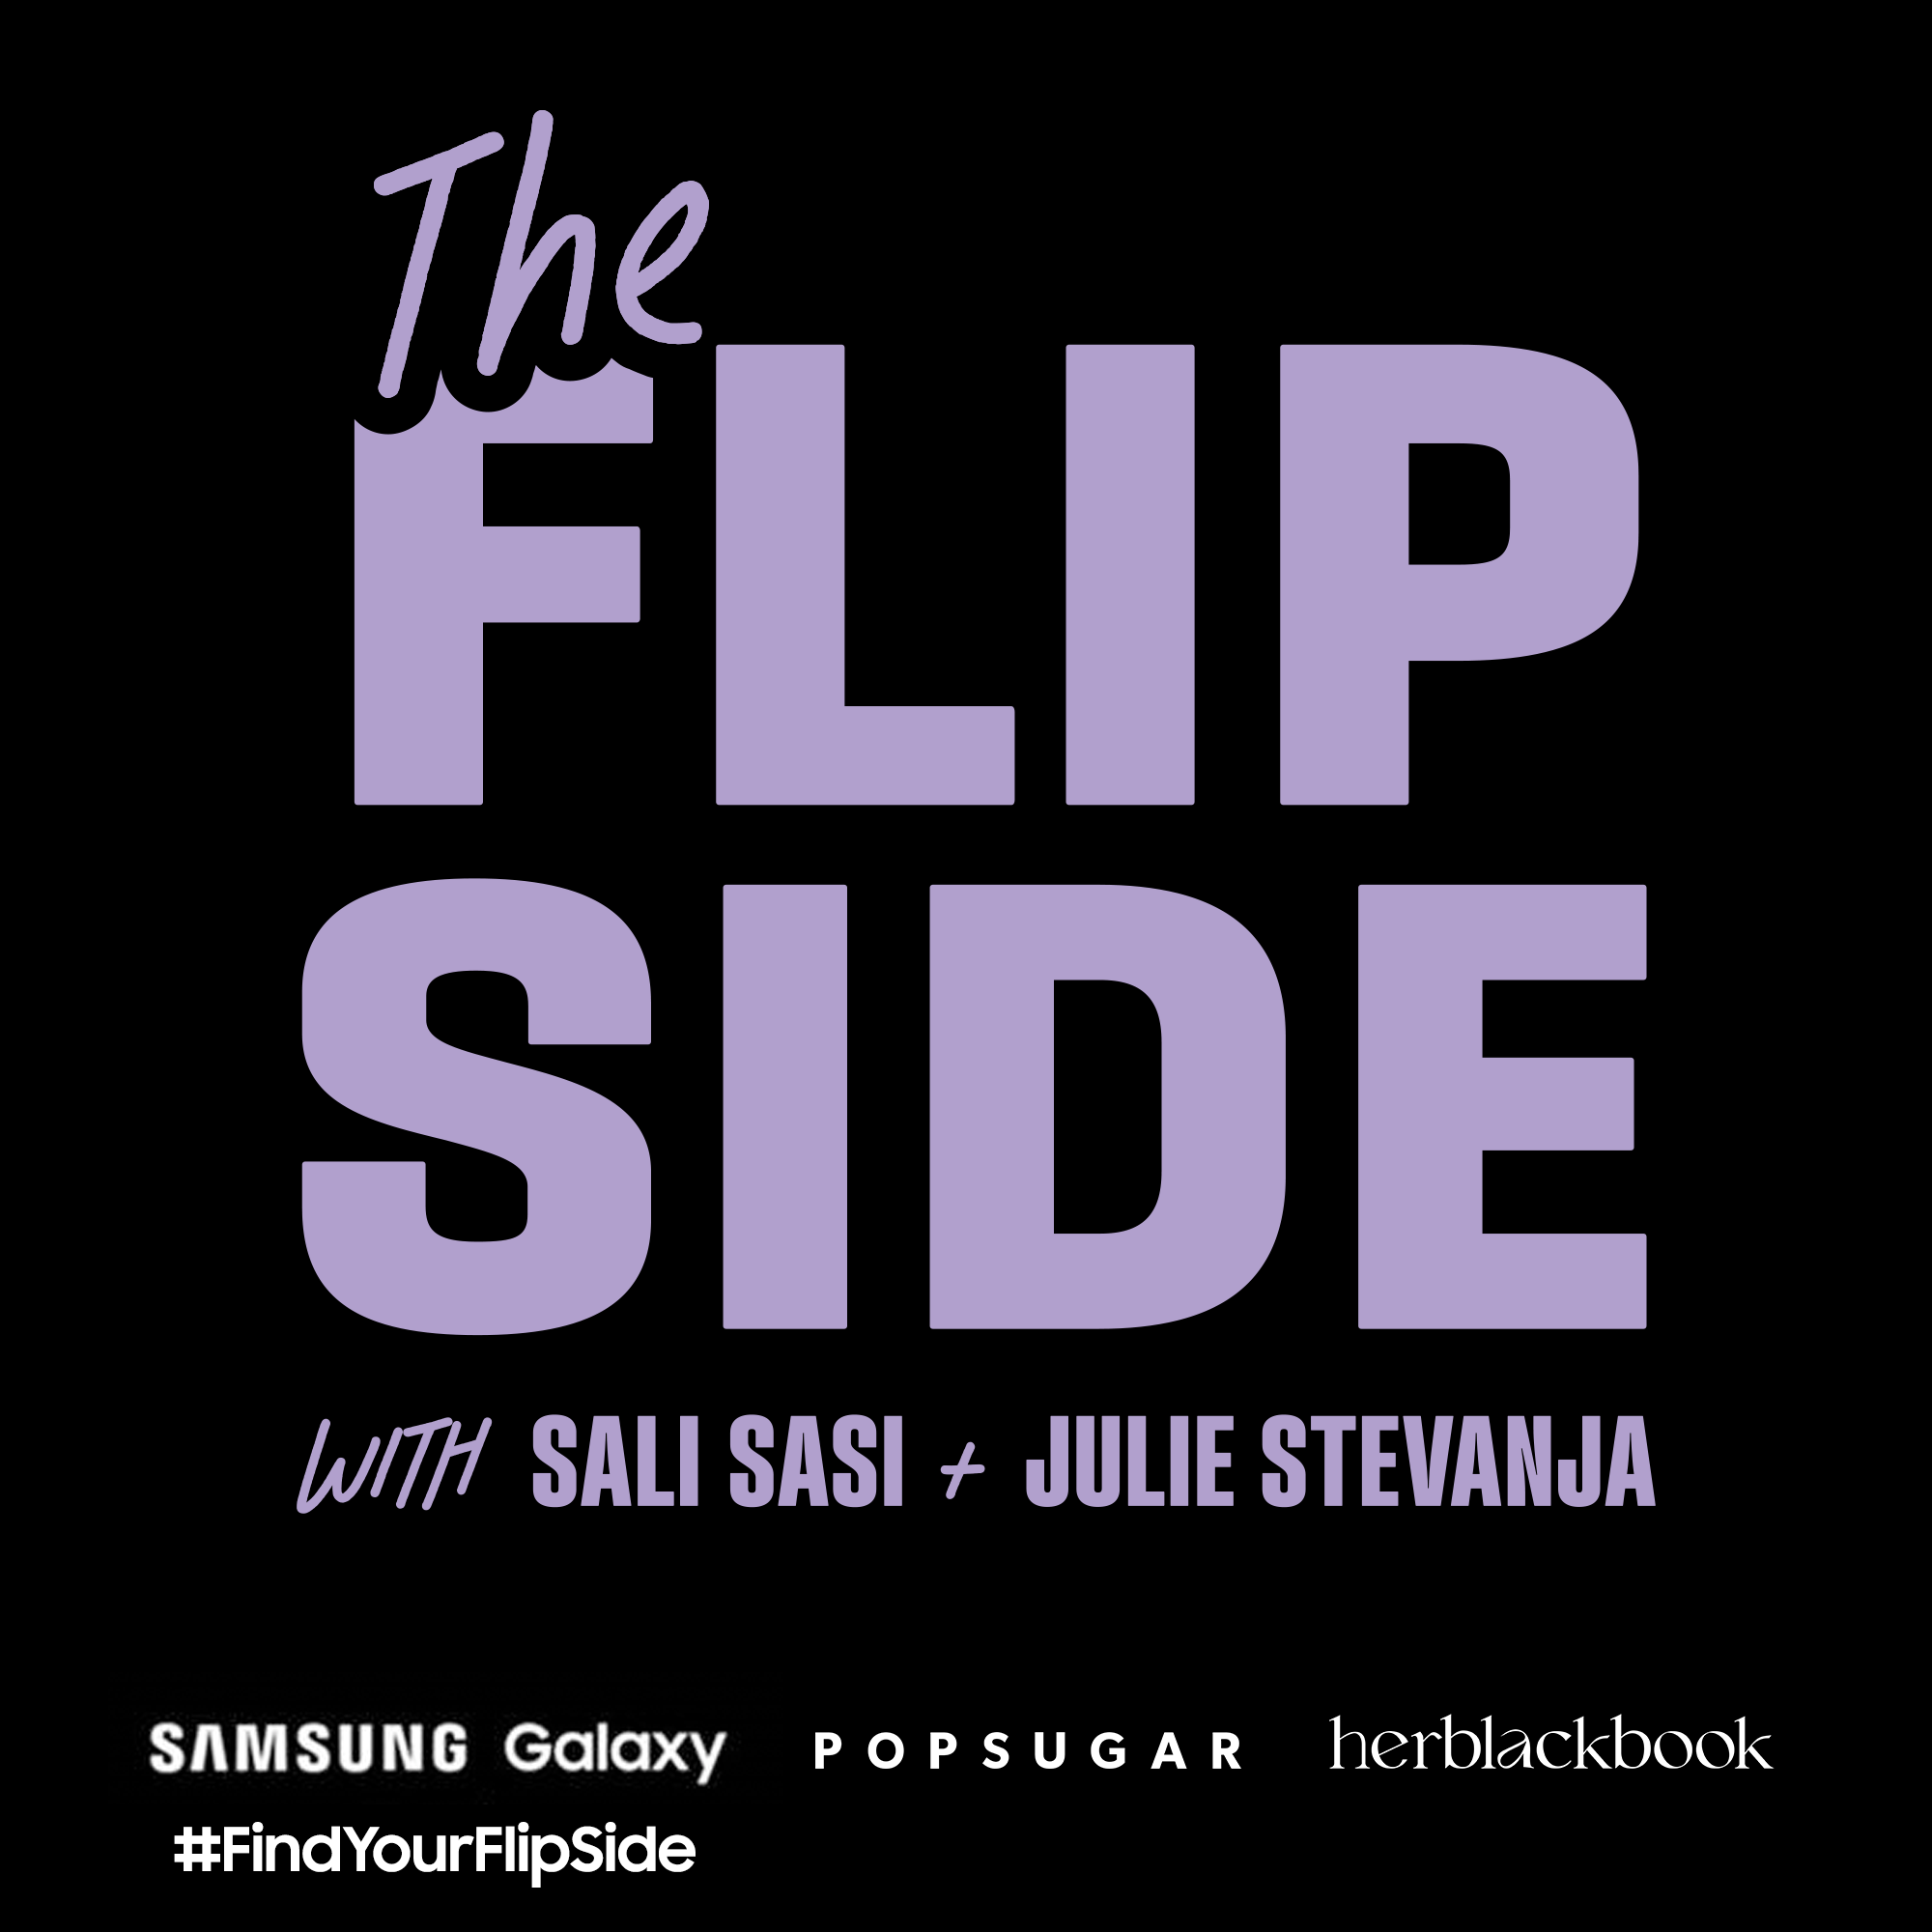 Welcome to The Flipside, With Sali Sasi and Julie Stevanja